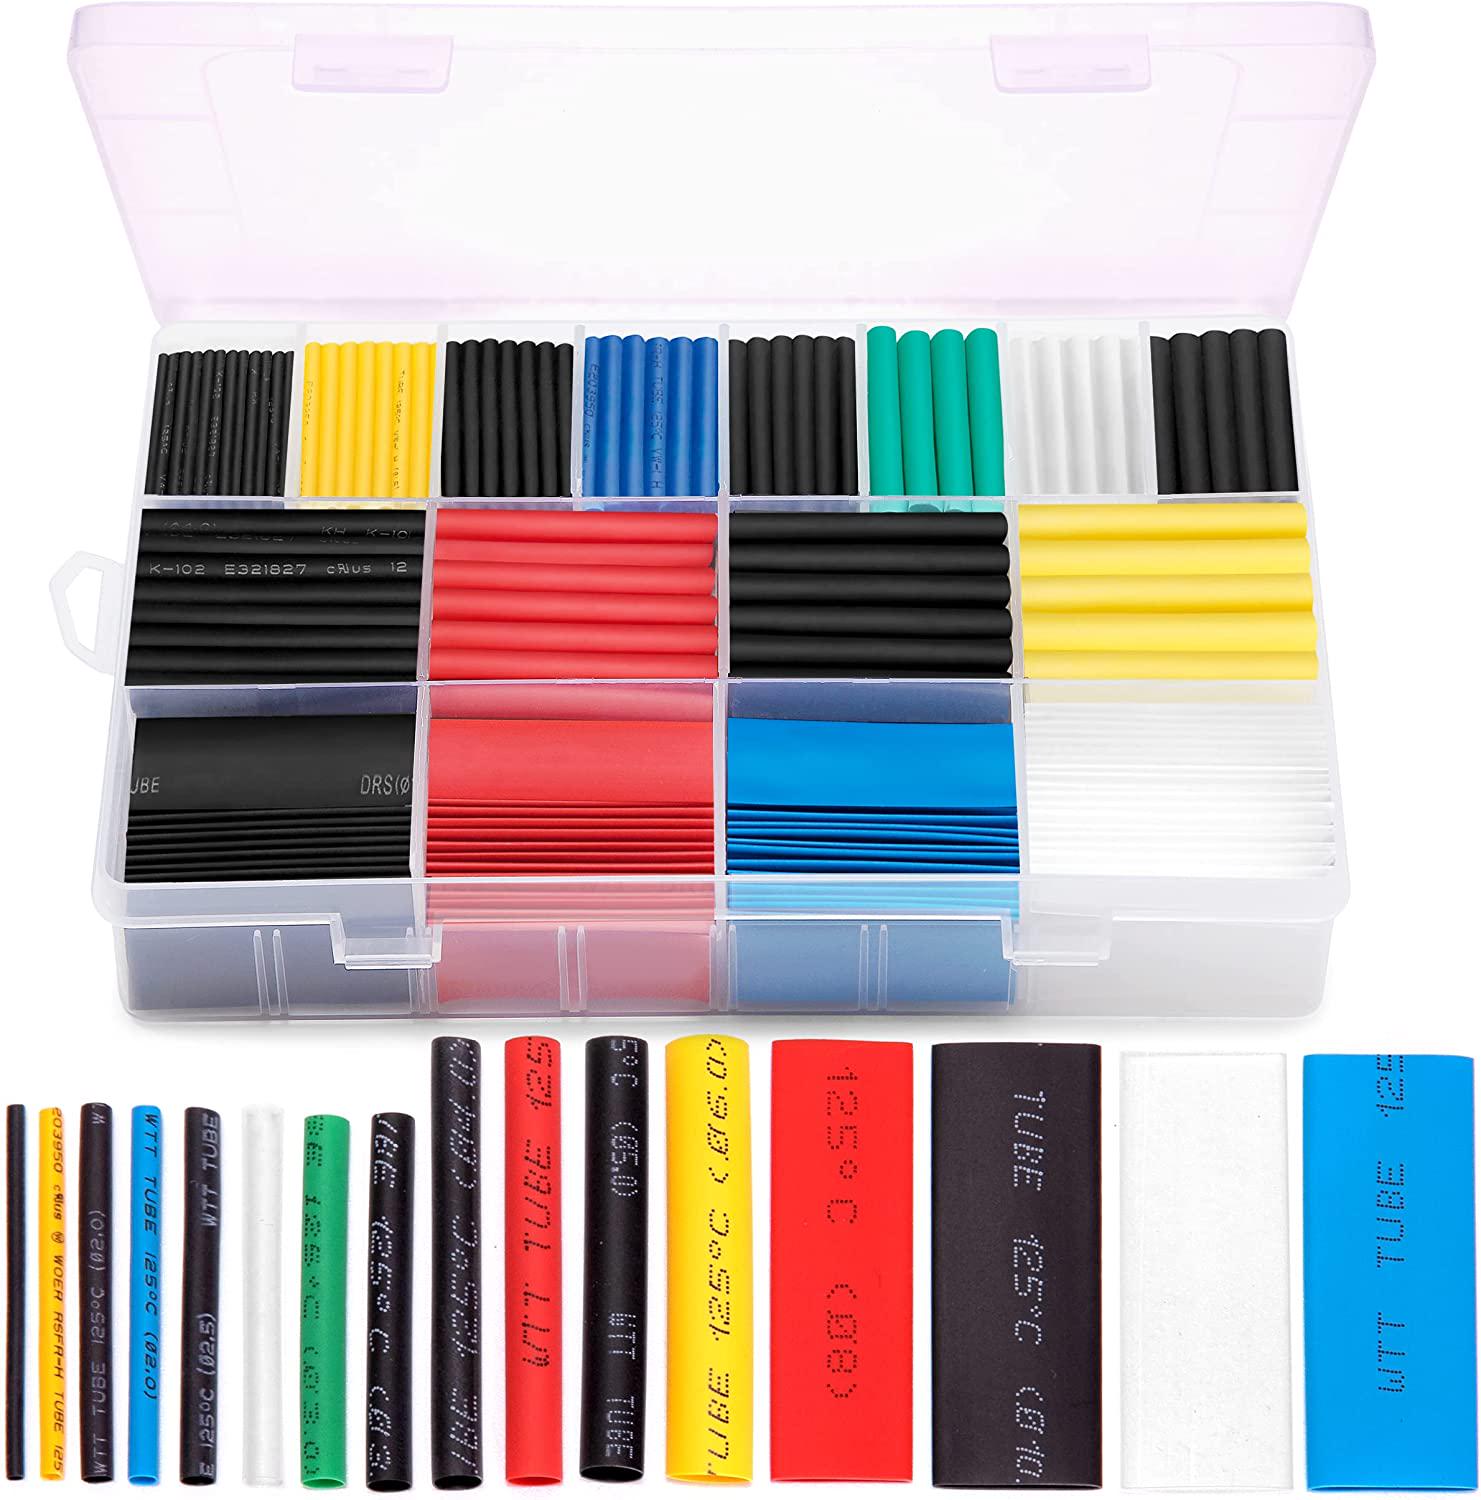 Ginsco, Ginsco 580 Pcs 2:1 Heat Shrink Tube 6 Colors 11 Sizes Tubing Set Combo Assorted Sleeving Wrap Cable Wire Kit For Diy